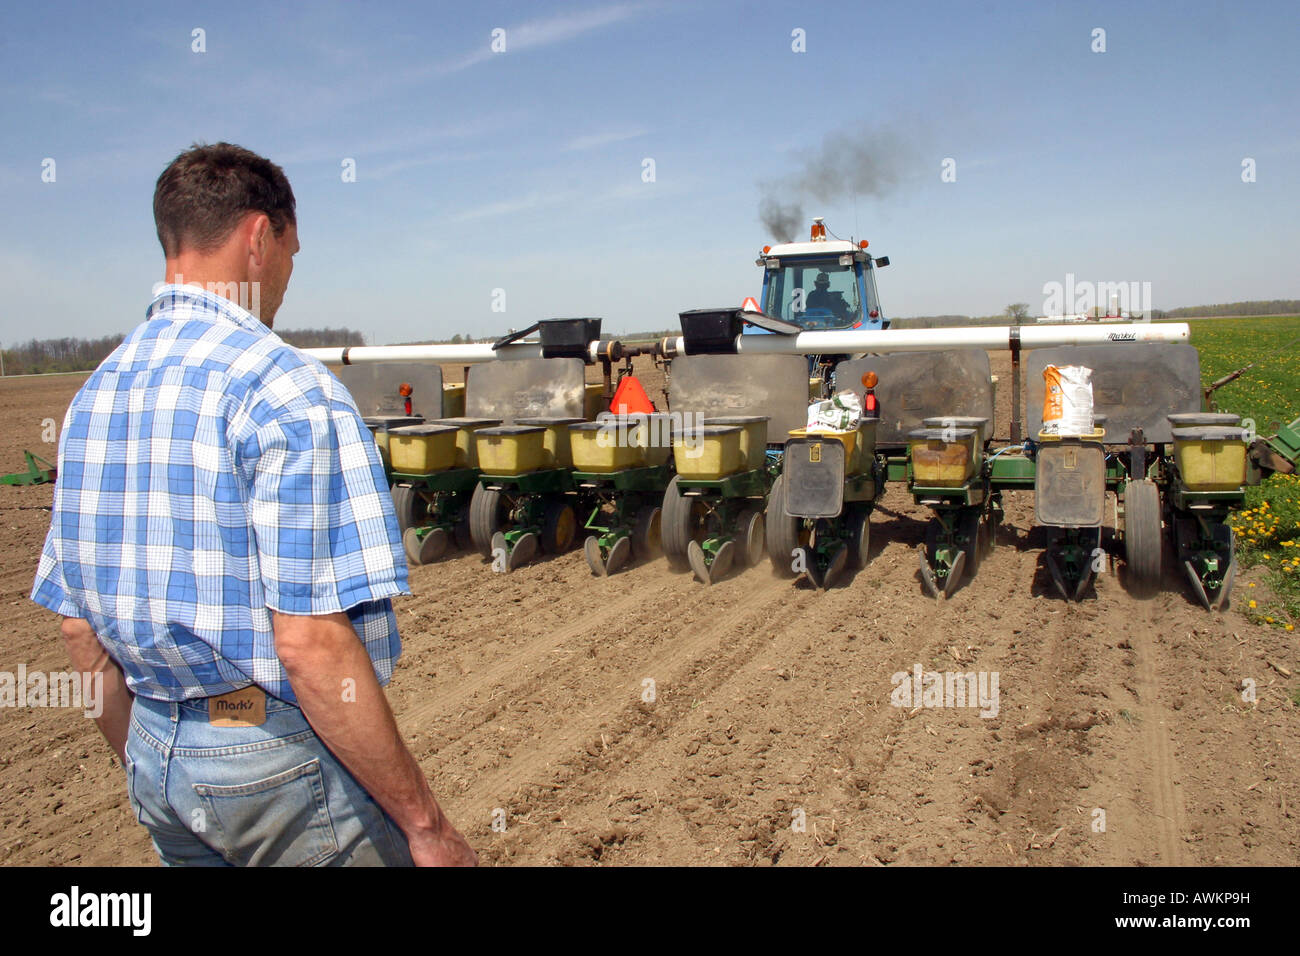 Another planting season begins in Ontario, Canada Stock Photo